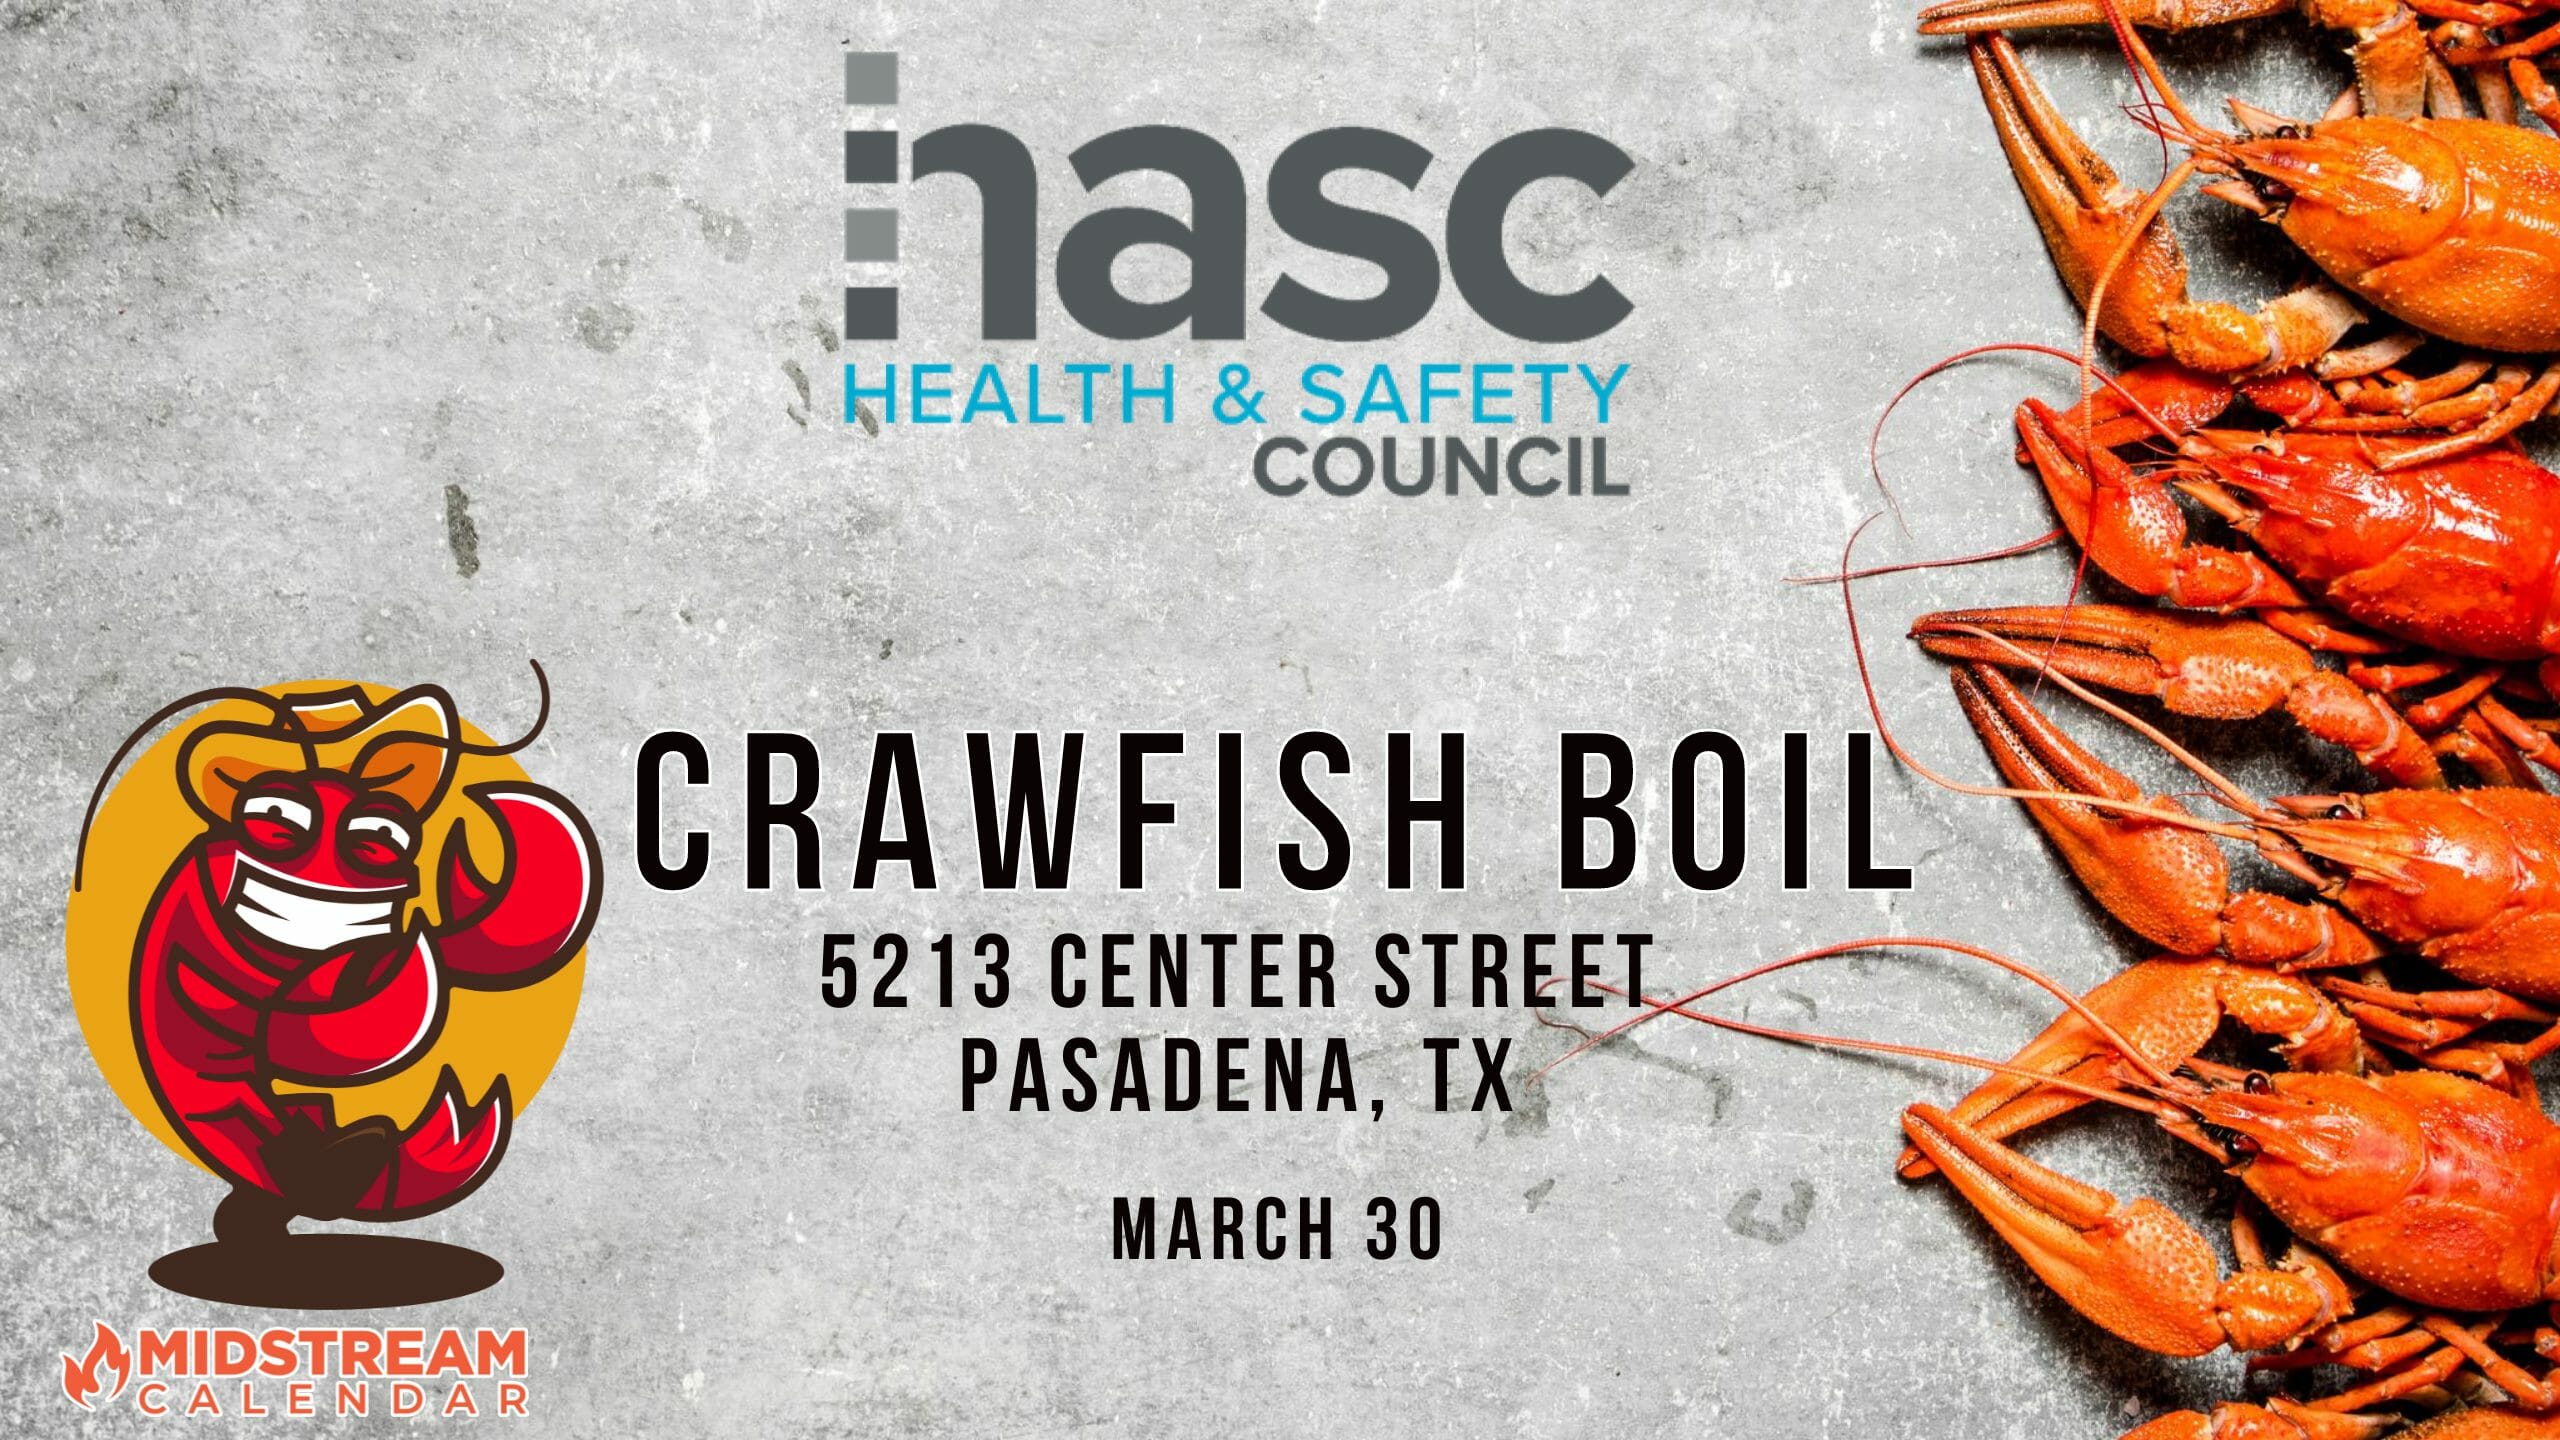 BIC Events in Downstream Industrial Crawfish Boils